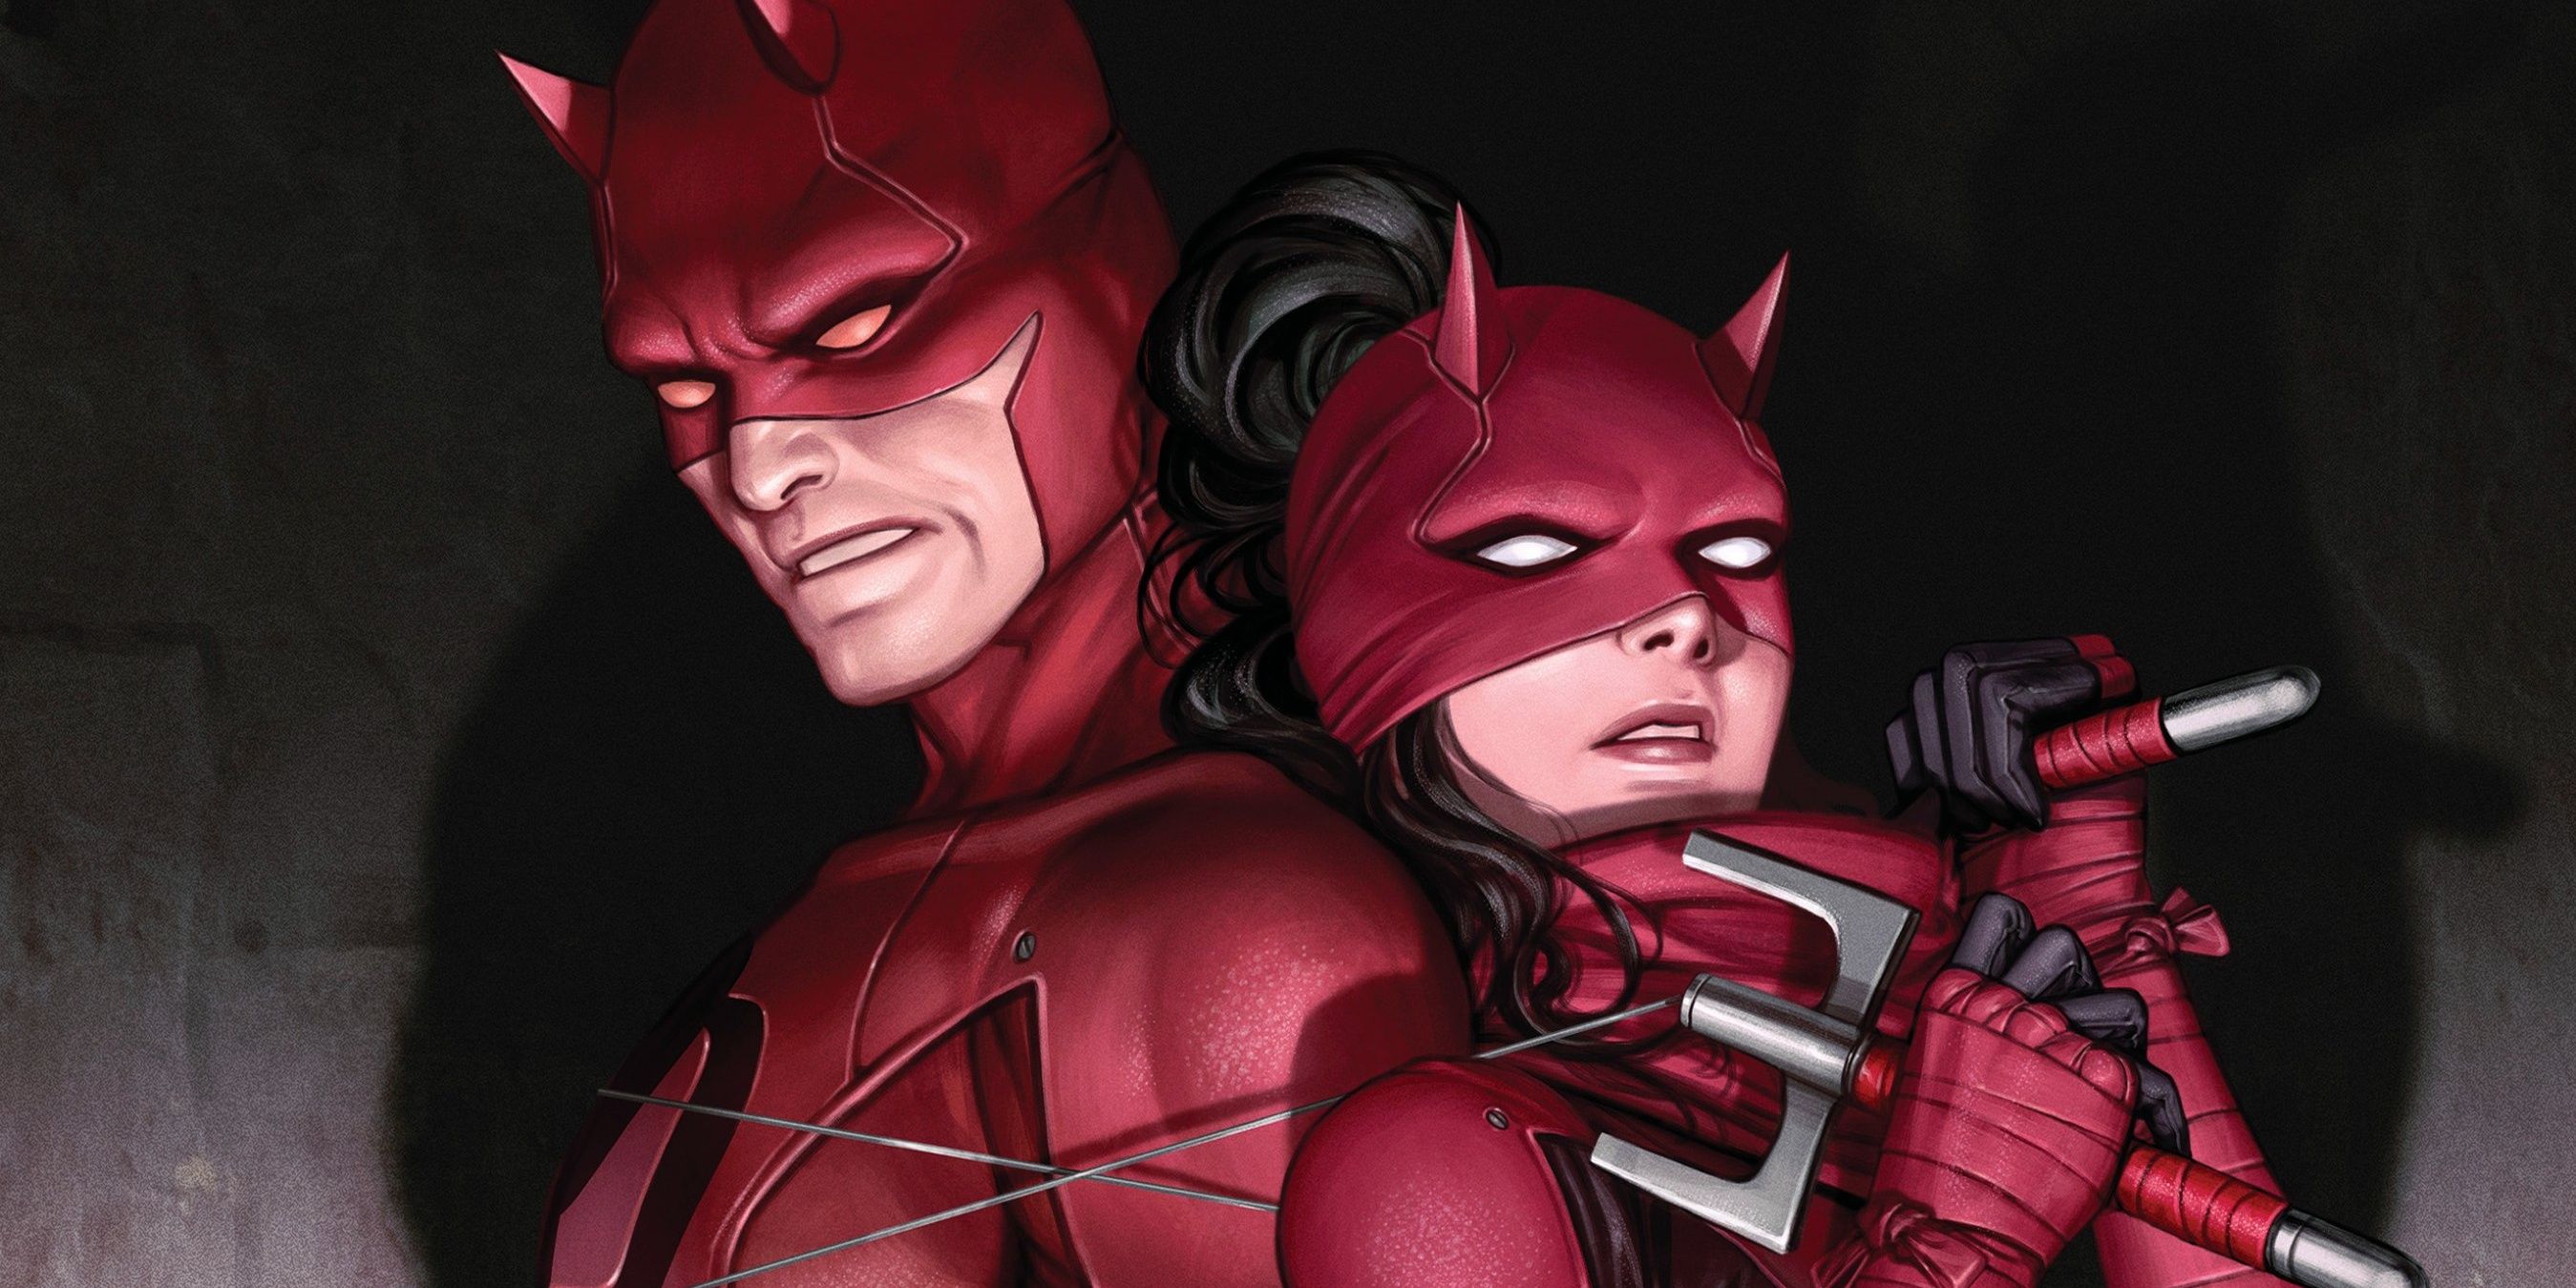 Elektra Natchios and Matt Murdock both as Daredevil on the cover of Devil's Reign Omega (2022)